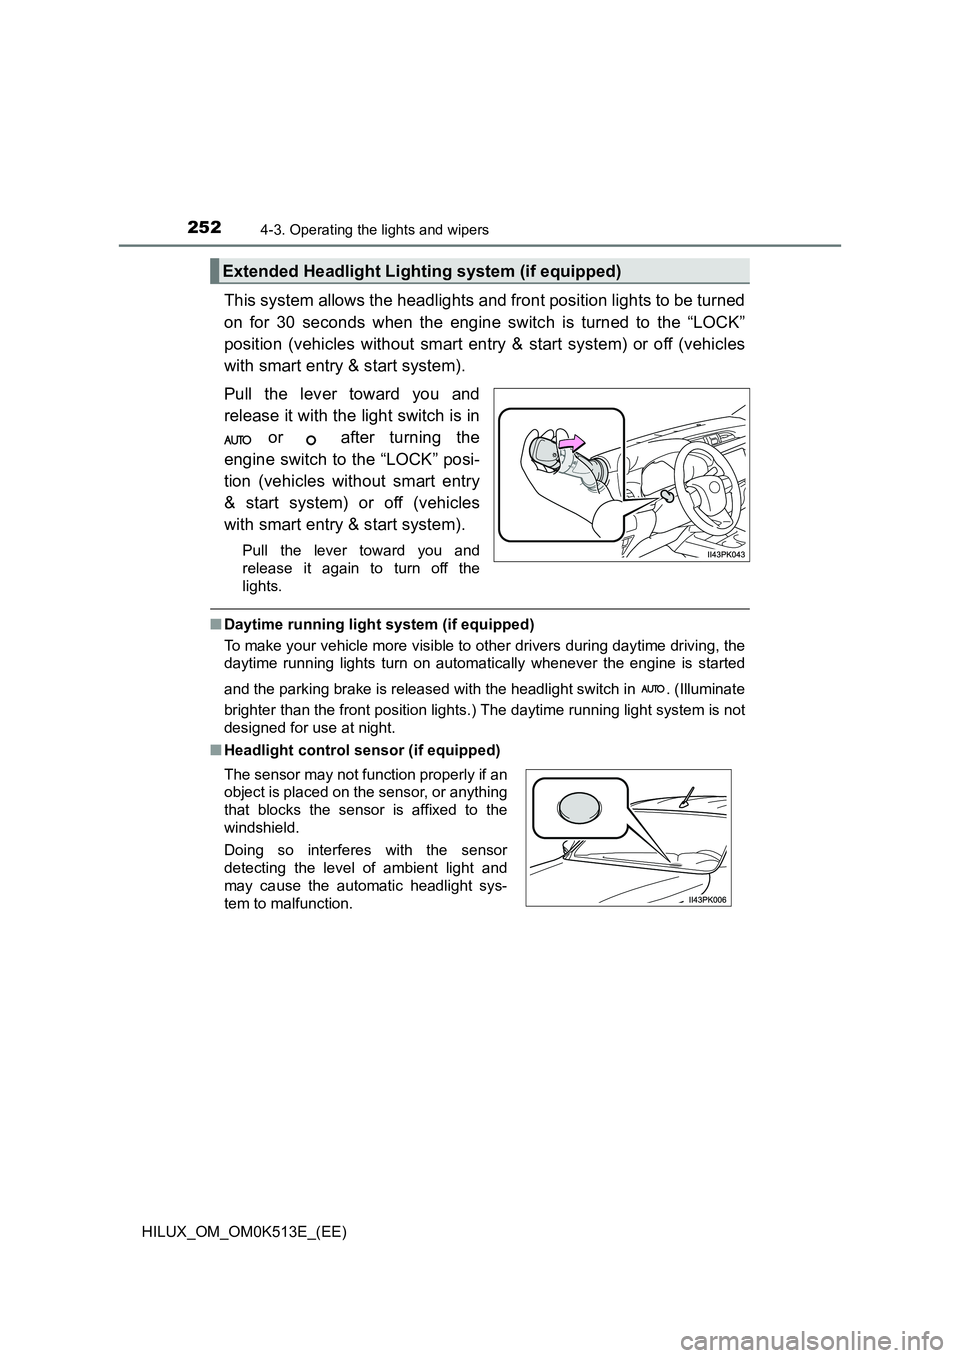 TOYOTA HILUX 2021  Owners Manual (in English) 2524-3. Operating the lights and wipers
HILUX_OM_OM0K513E_(EE)
This system allows the headlights and front position lights to be turned 
on for 30 seconds when the engine switch is turned to the “LO